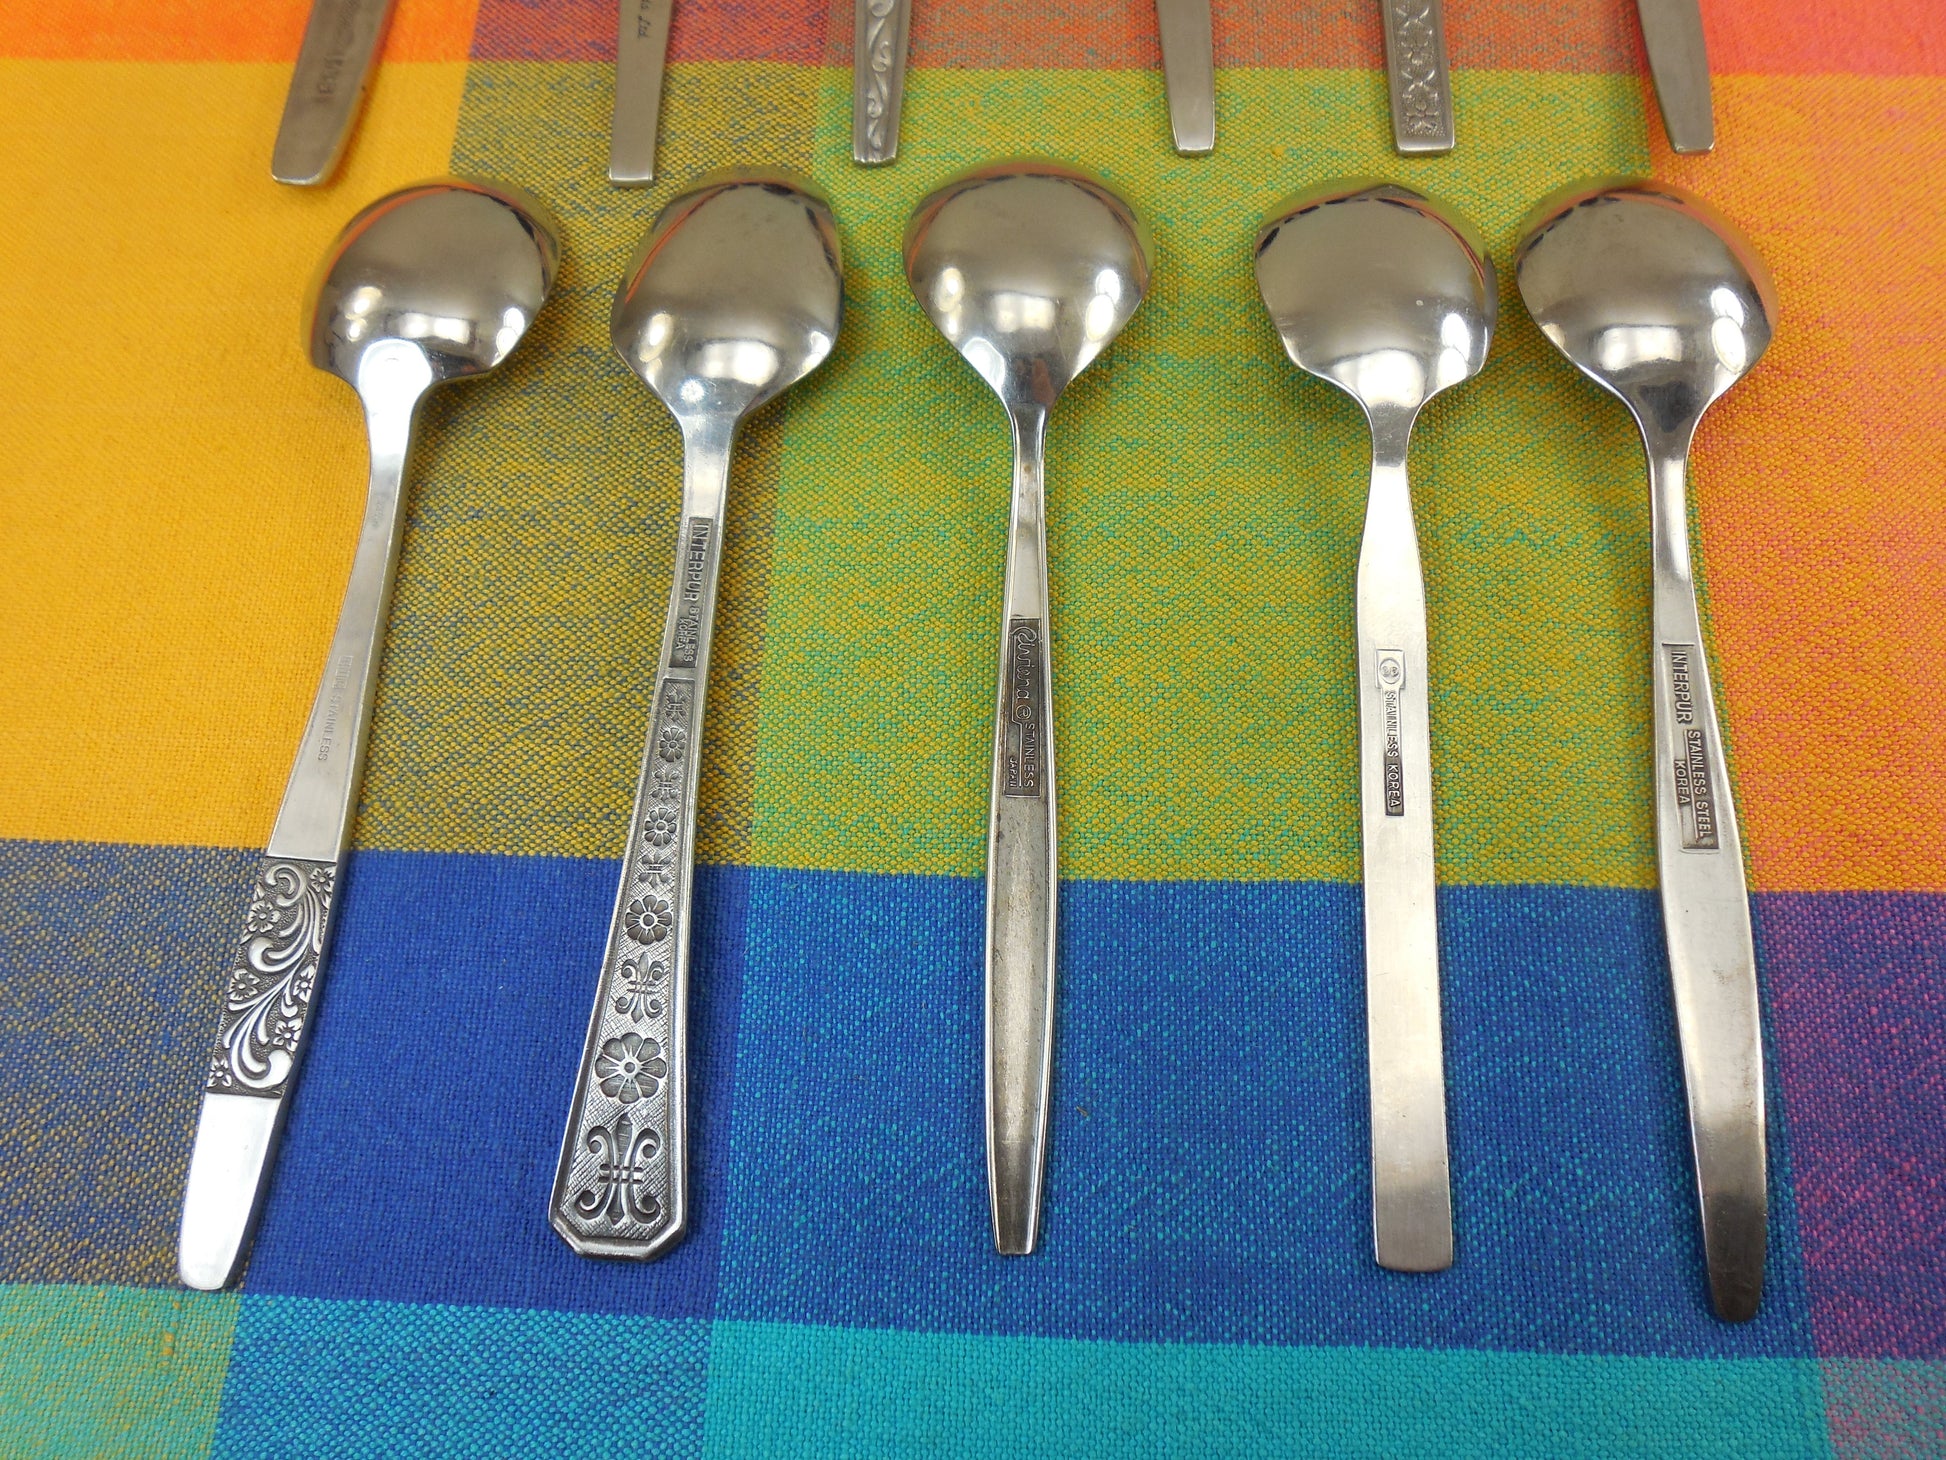 Mismatched Flatware Black Highlight Modern Stainless - 11 Sugar Nut Spoons - Mixed Maker Pattern USA